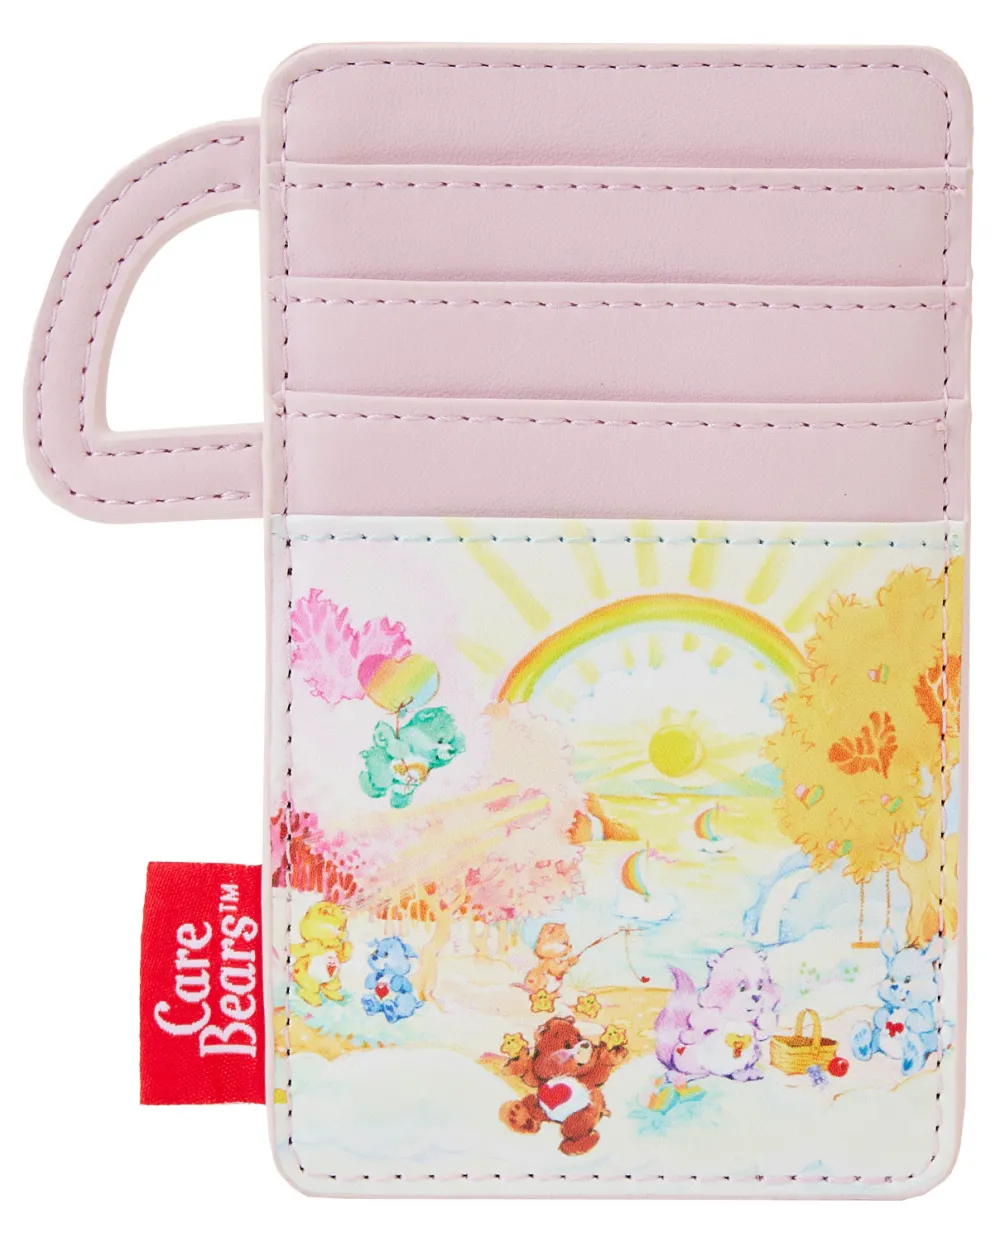 Care Bears and Cousins Card Holder Loungefly